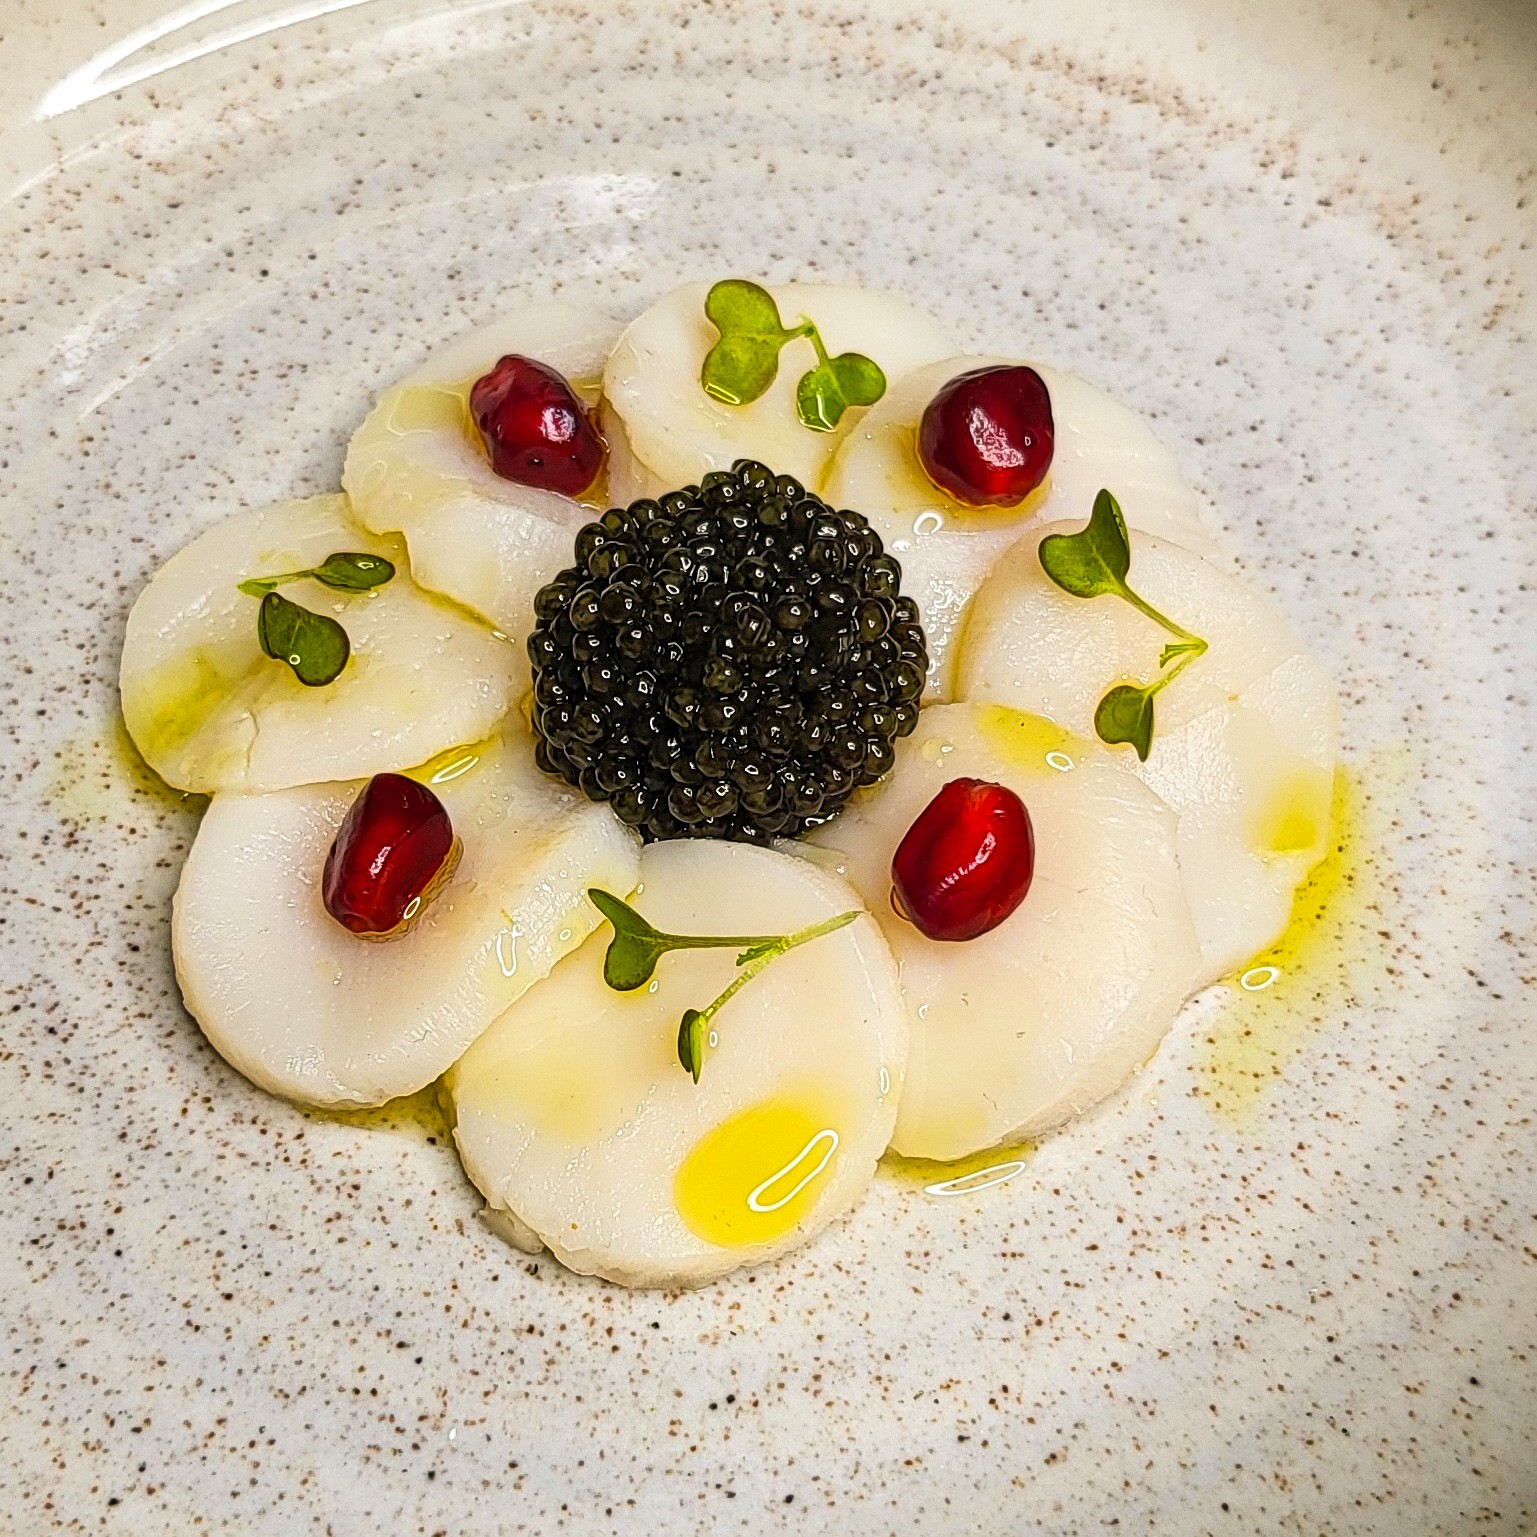 Elevate your dish with caviar delivery from Sterling Caviar